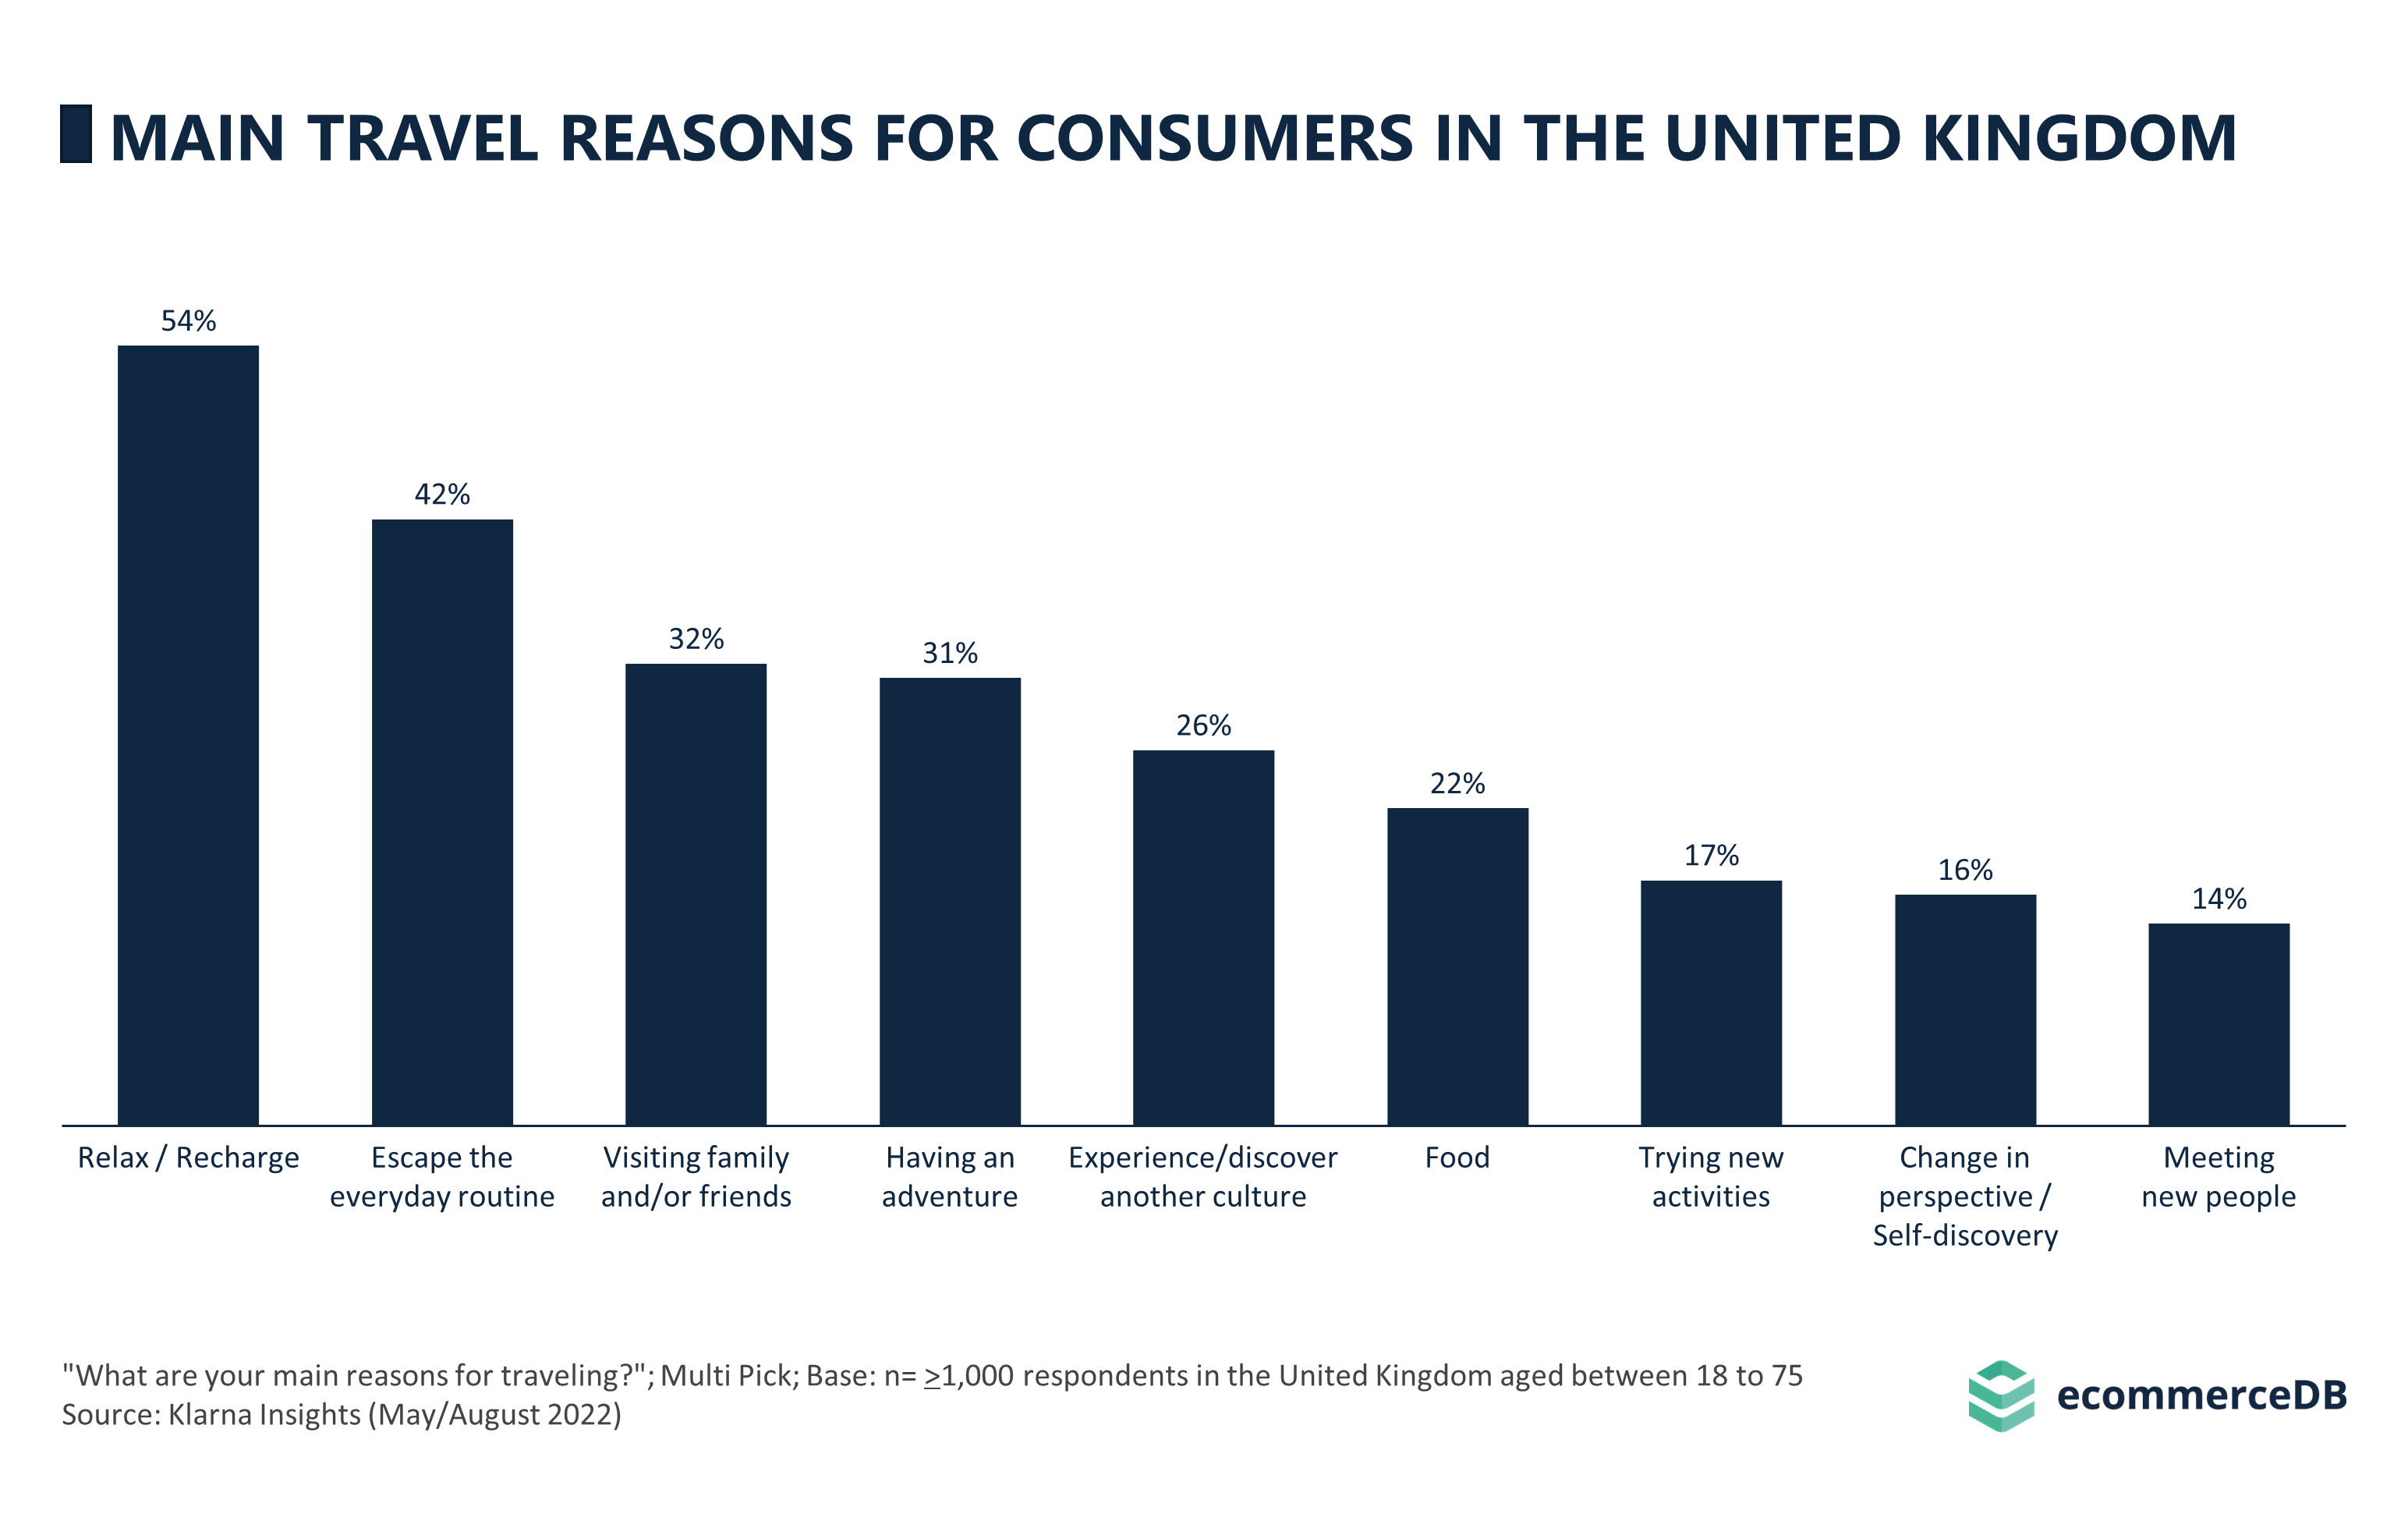 Main Travel Reasons for Consumers in the United Kingdom